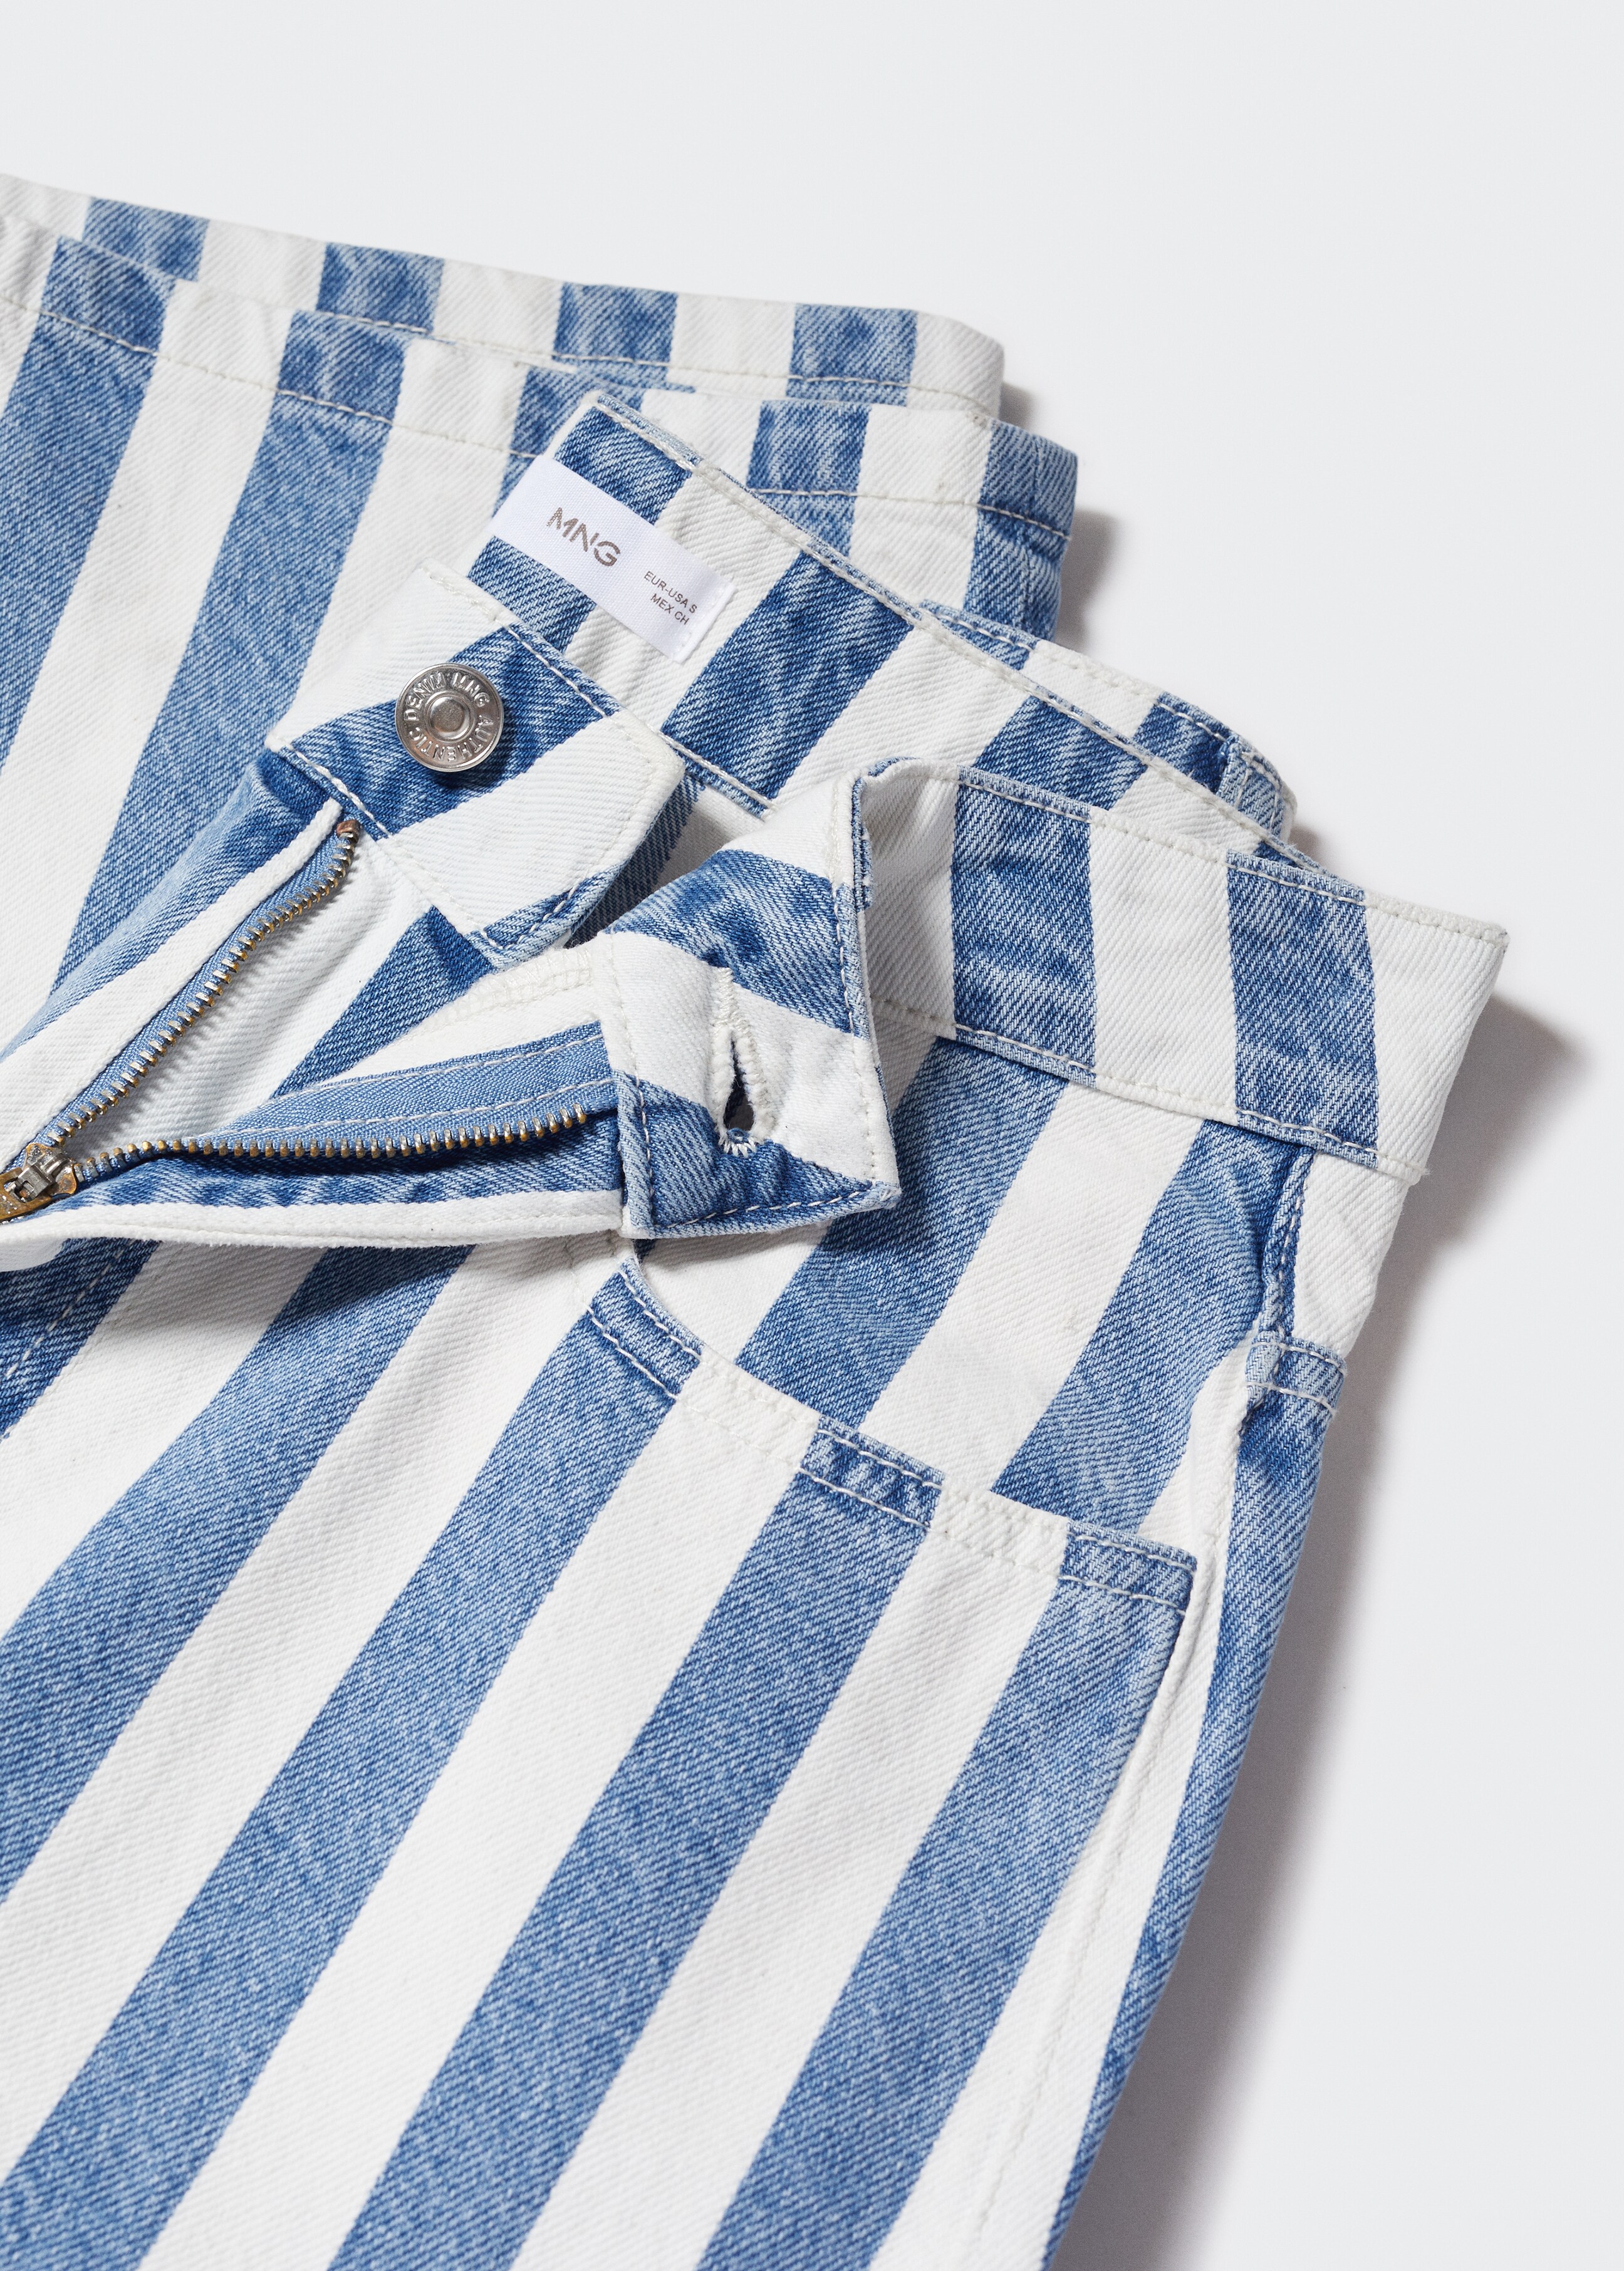 Straight striped jeans - Details of the article 8